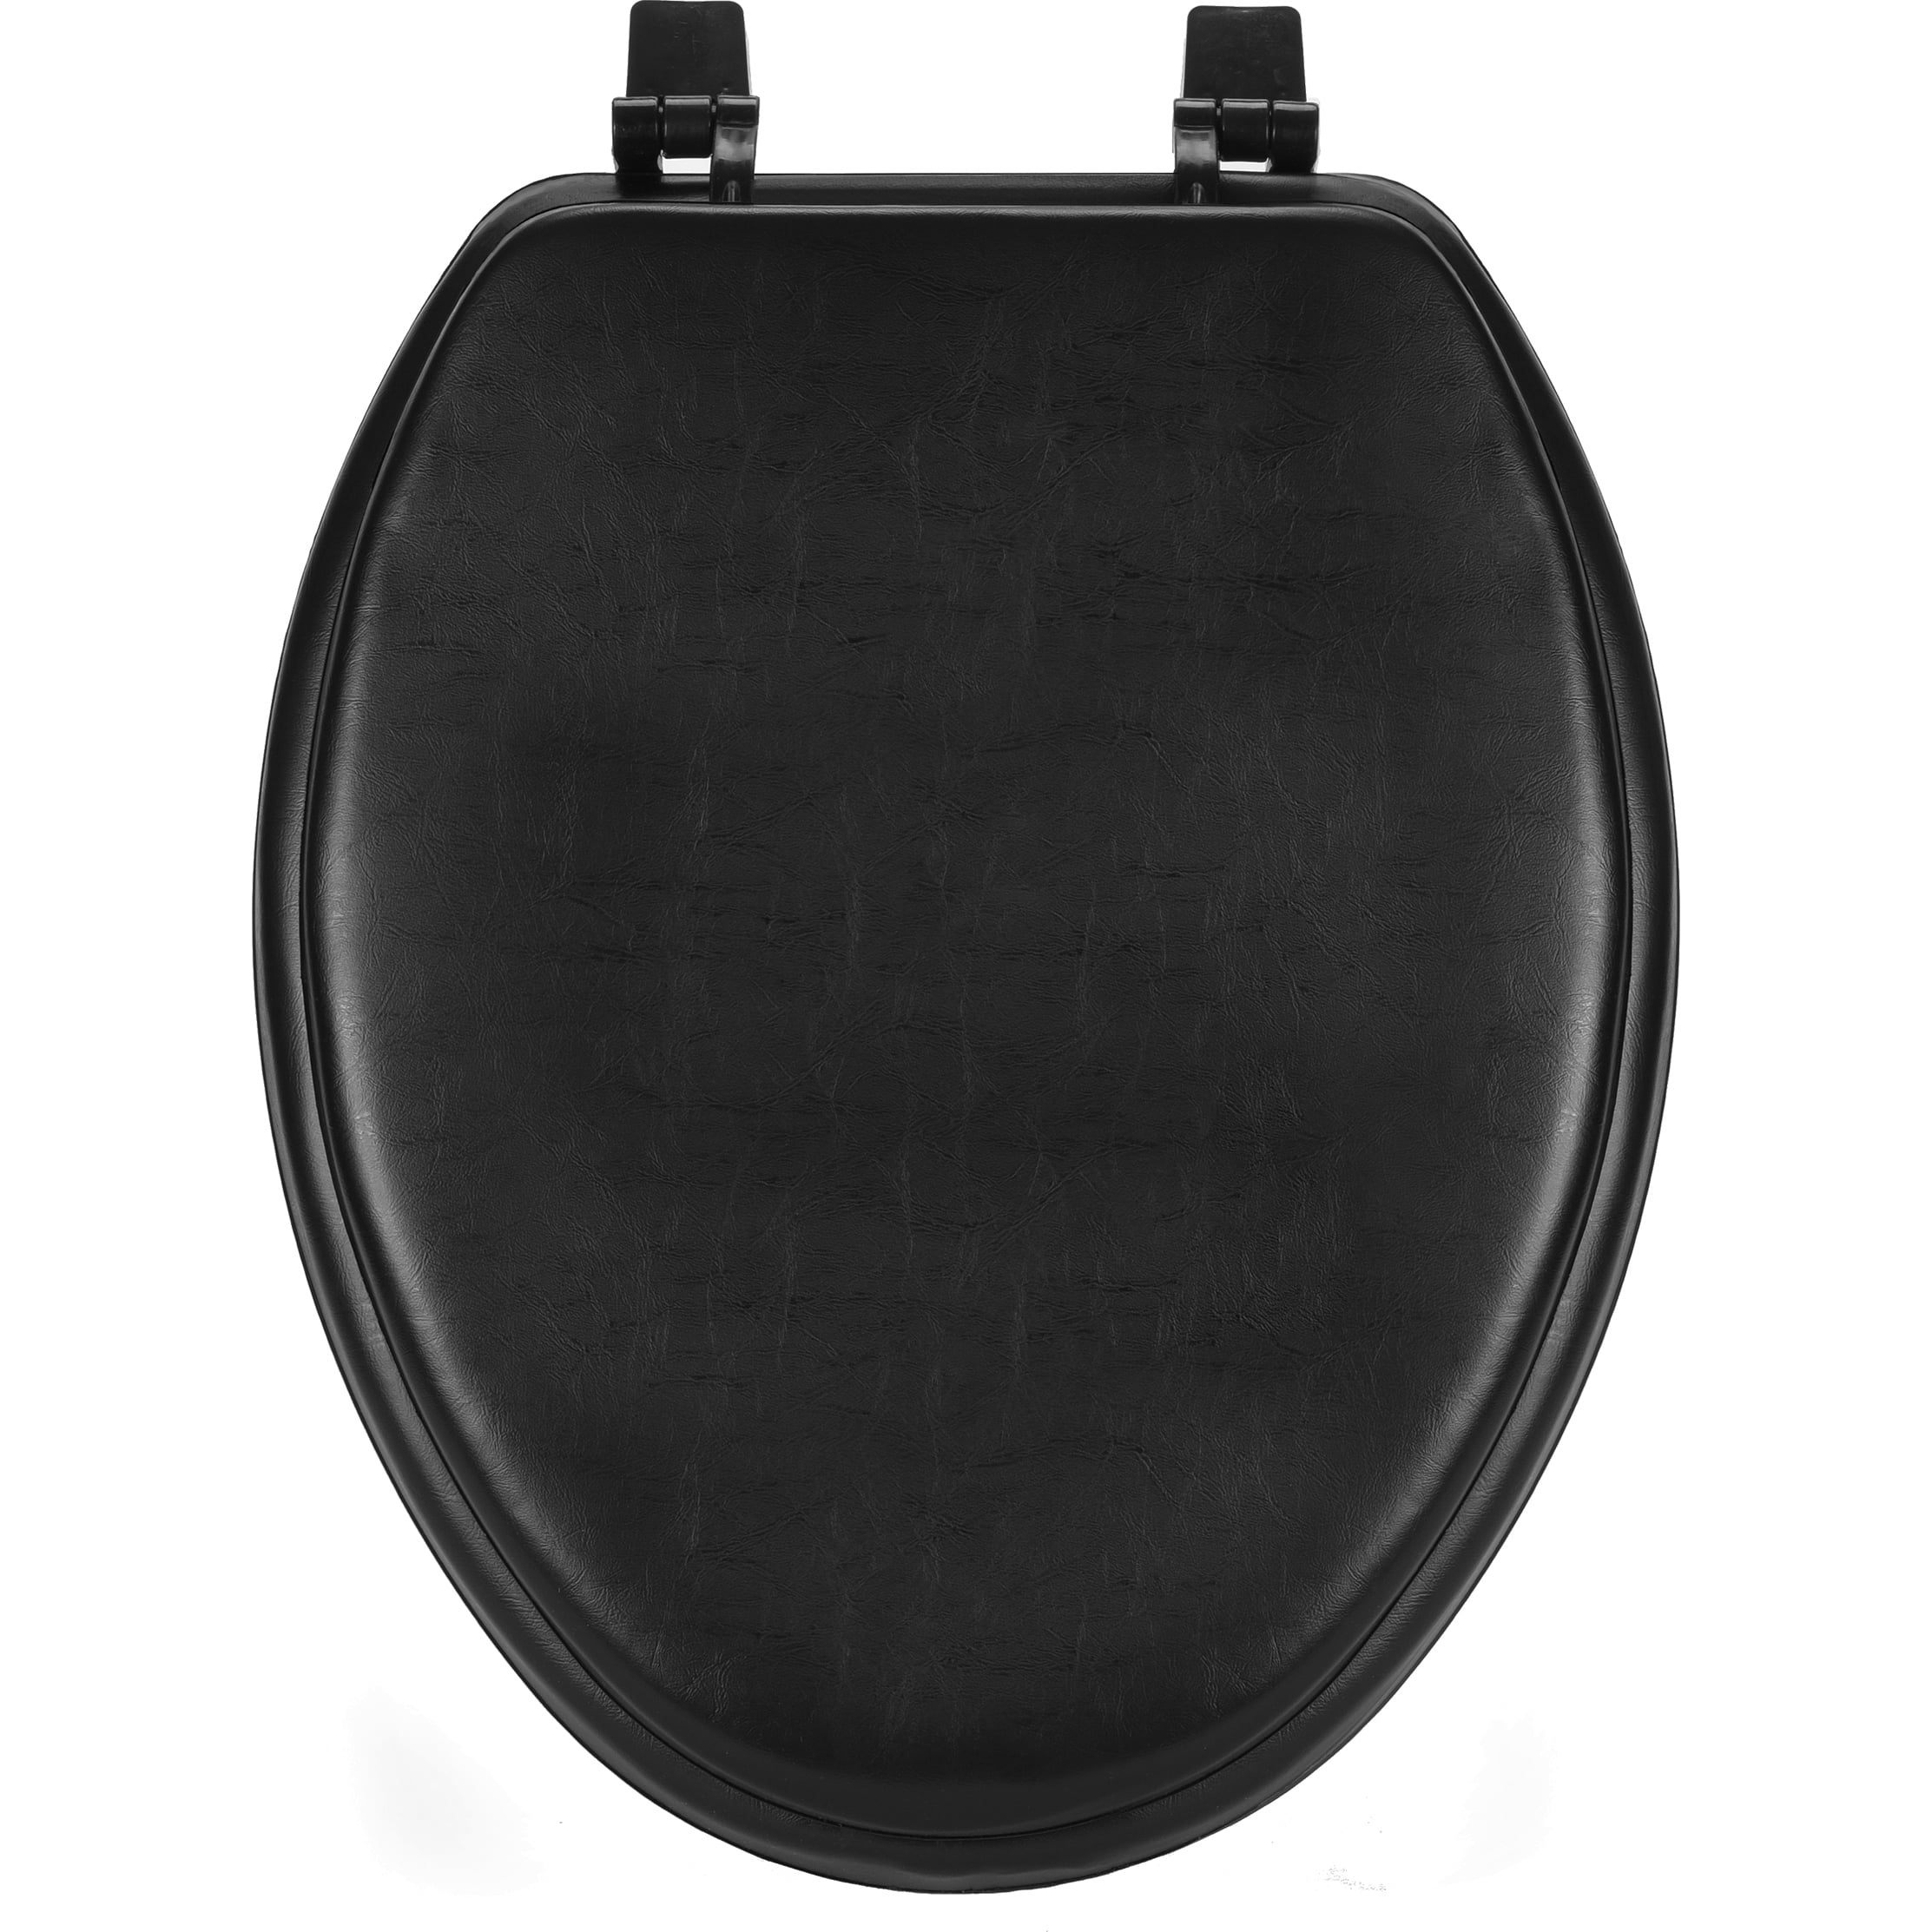 Ginsey Standard Soft Toilet Seat With Plastic Hinges Merlot for sale online 